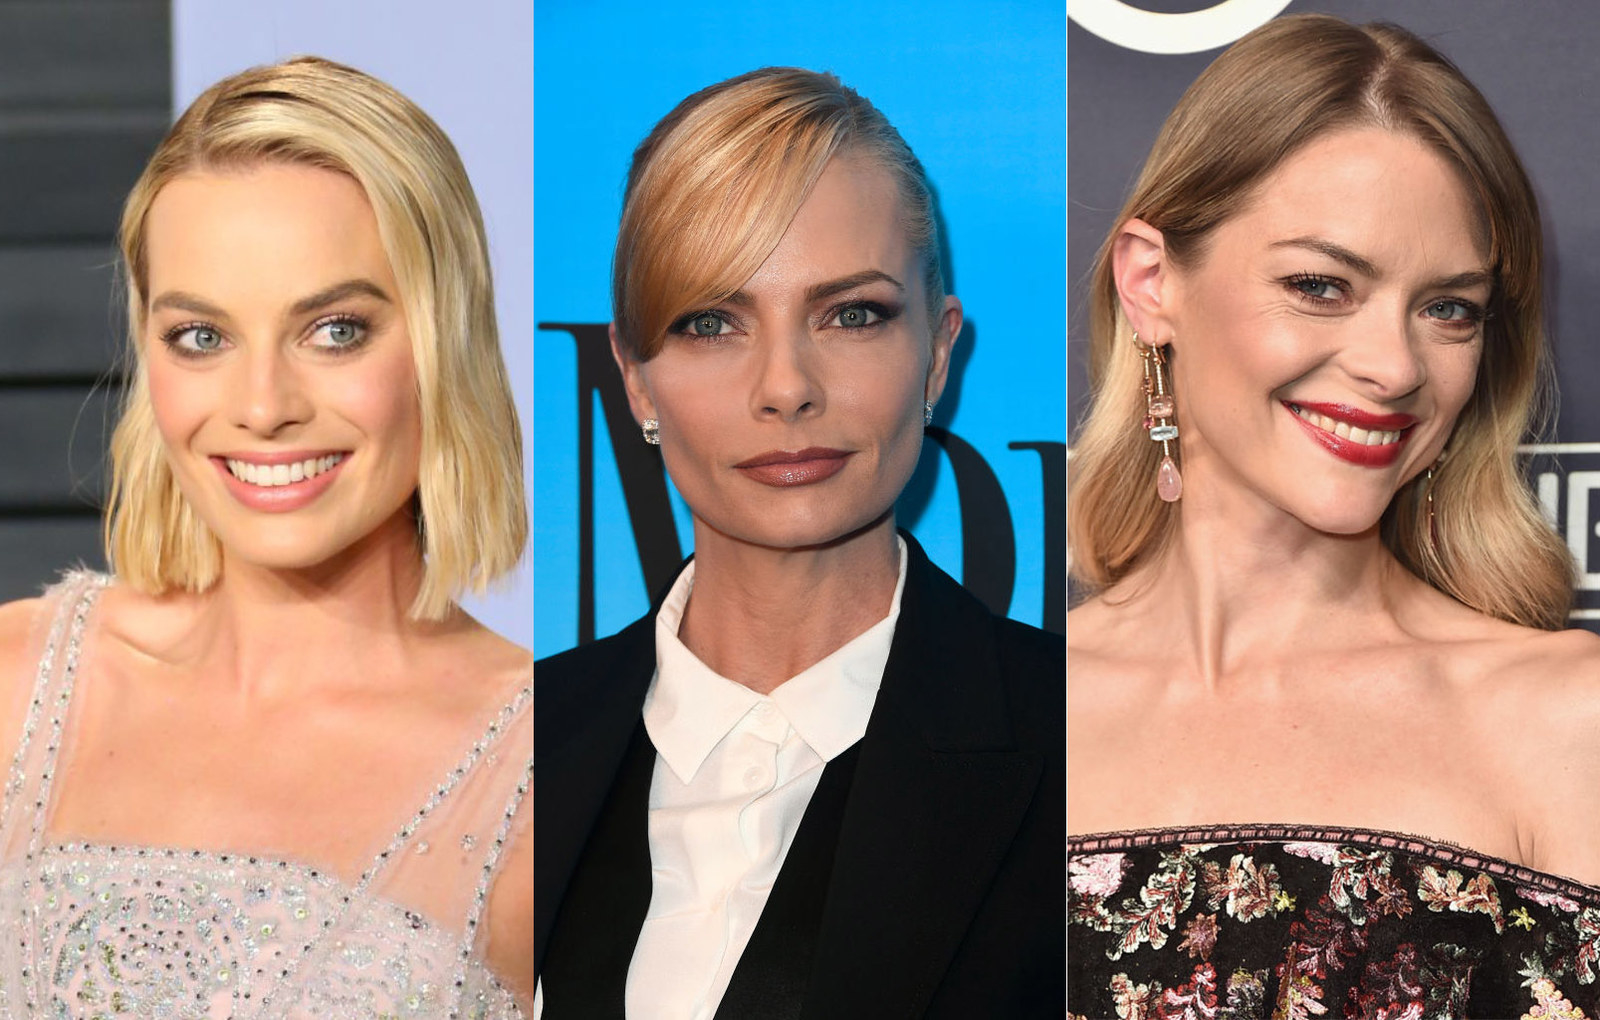 Side-by-side of Margot Robbie, Jaime Pressly, and Jaime King